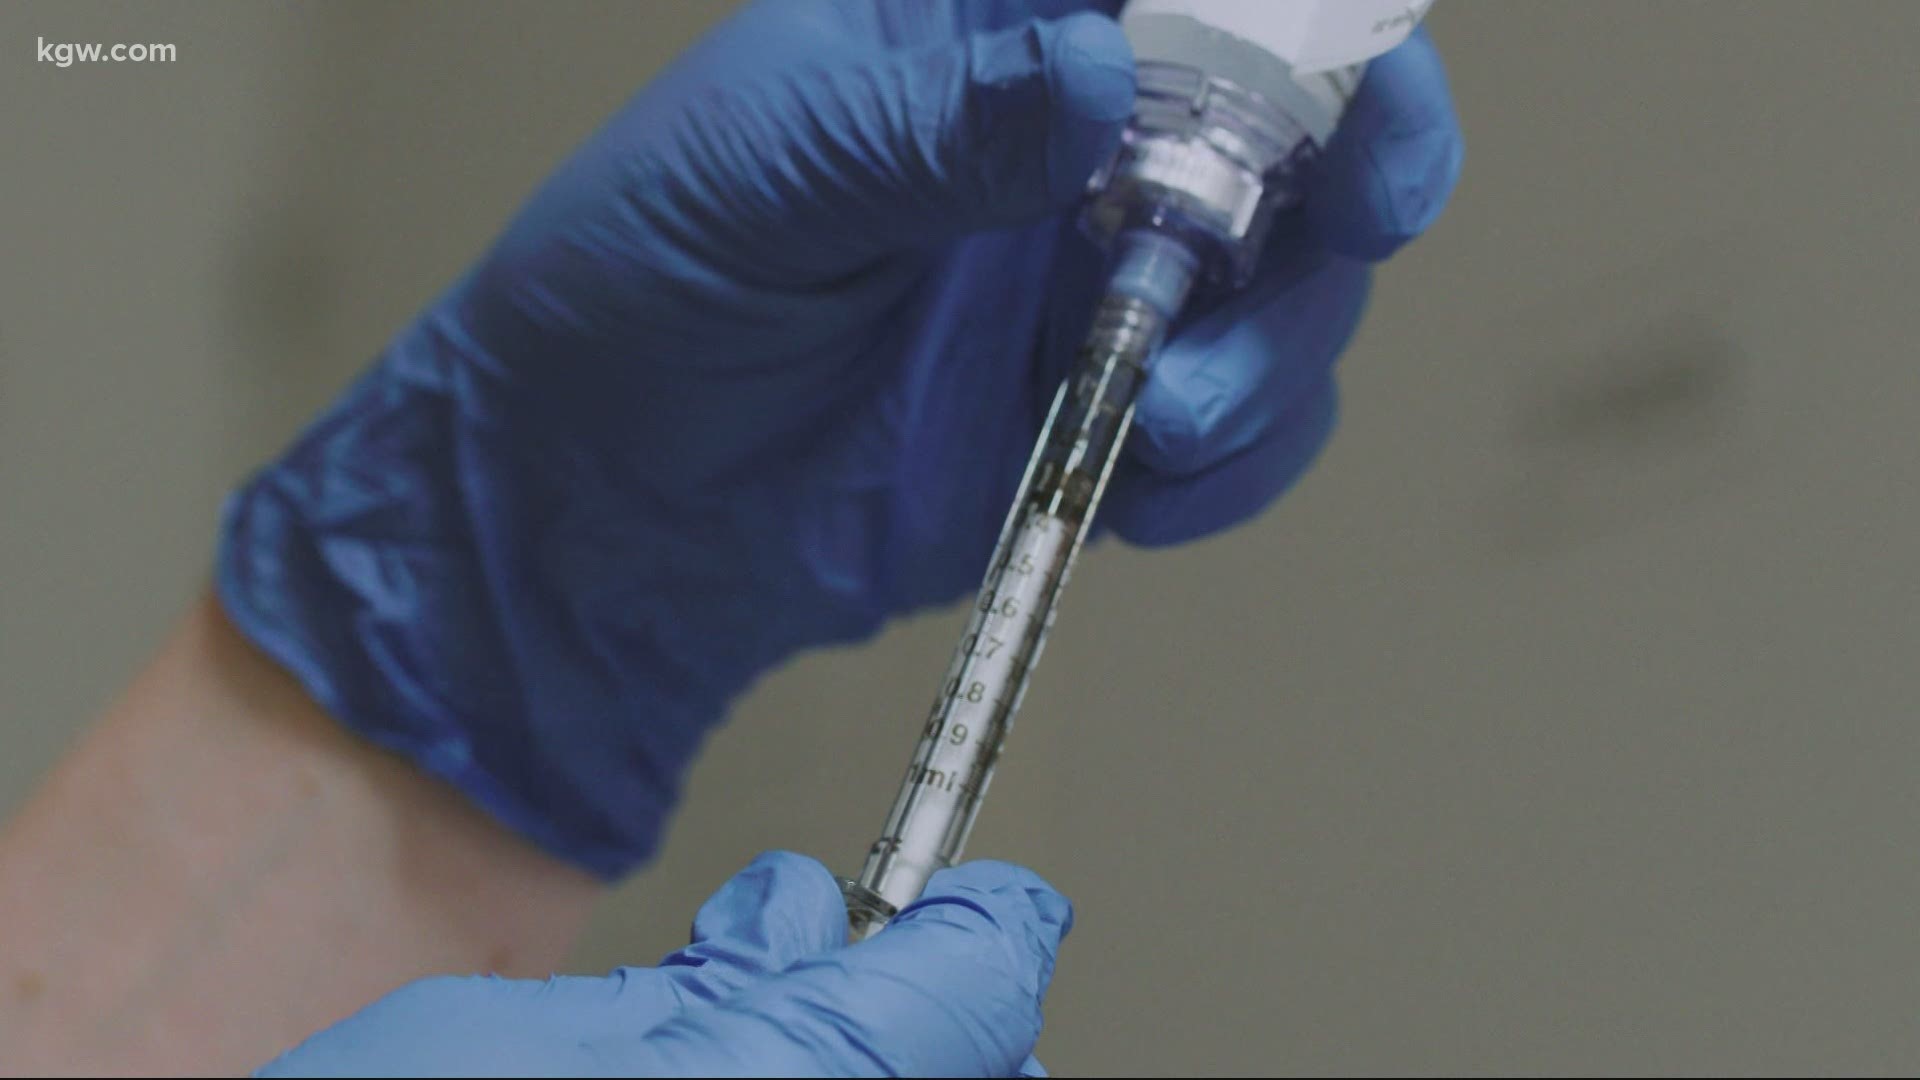 How are Oregon and Washington planning to distribute COVID-19 vaccines once they’re available? Pat Dooris reports on their plans.